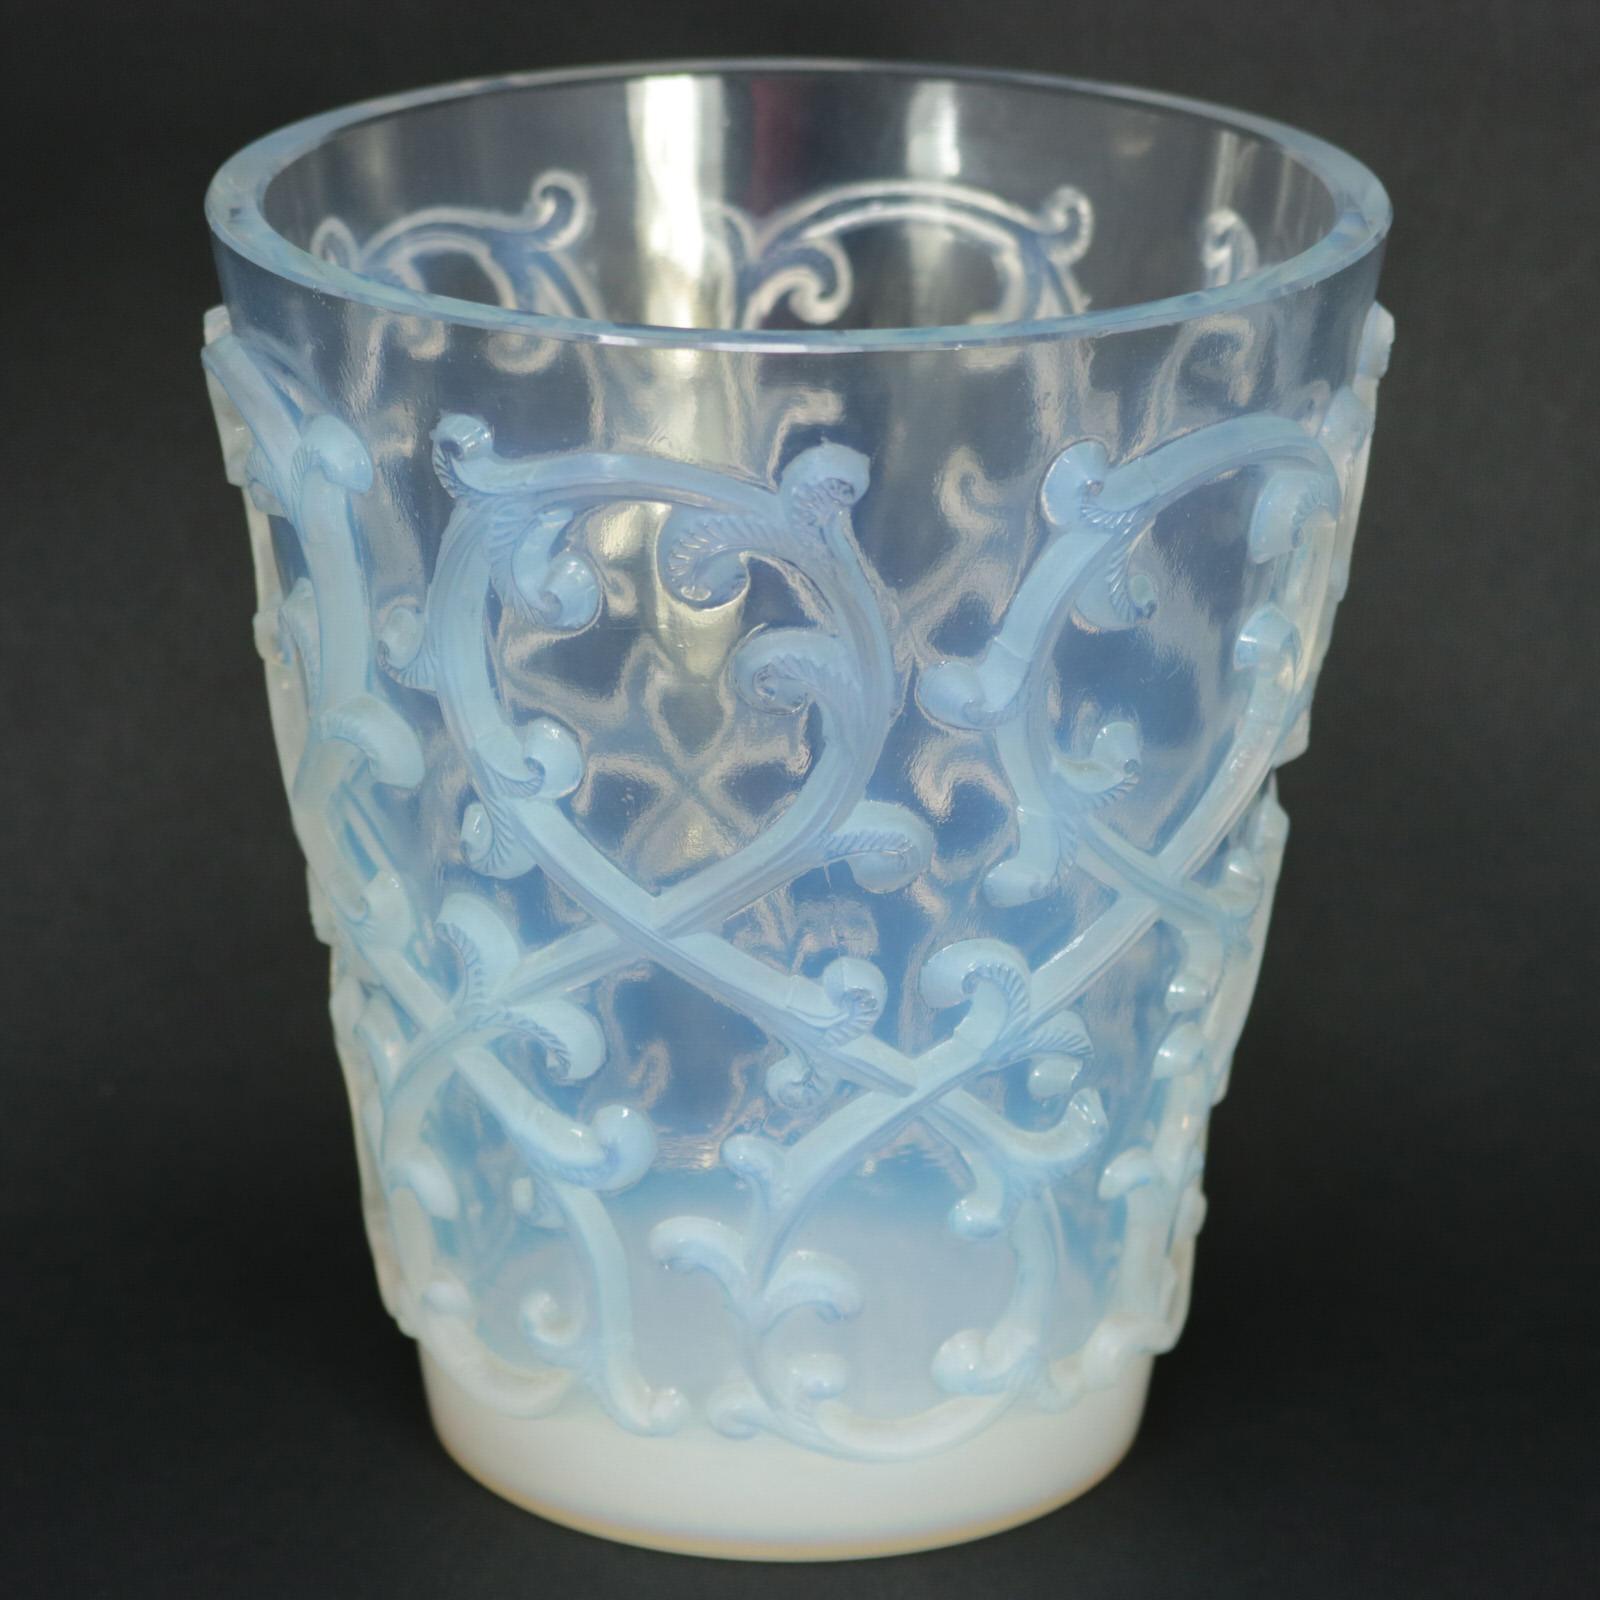 Rene Lalique opalescent glass 'Sarments' wine glass rinser. This pattern features a leafy branch, in relief around the sides. Stencilled makers mark, 'R LALIQUE FRANCE'. Book reference: Marcilhac 10-3478.